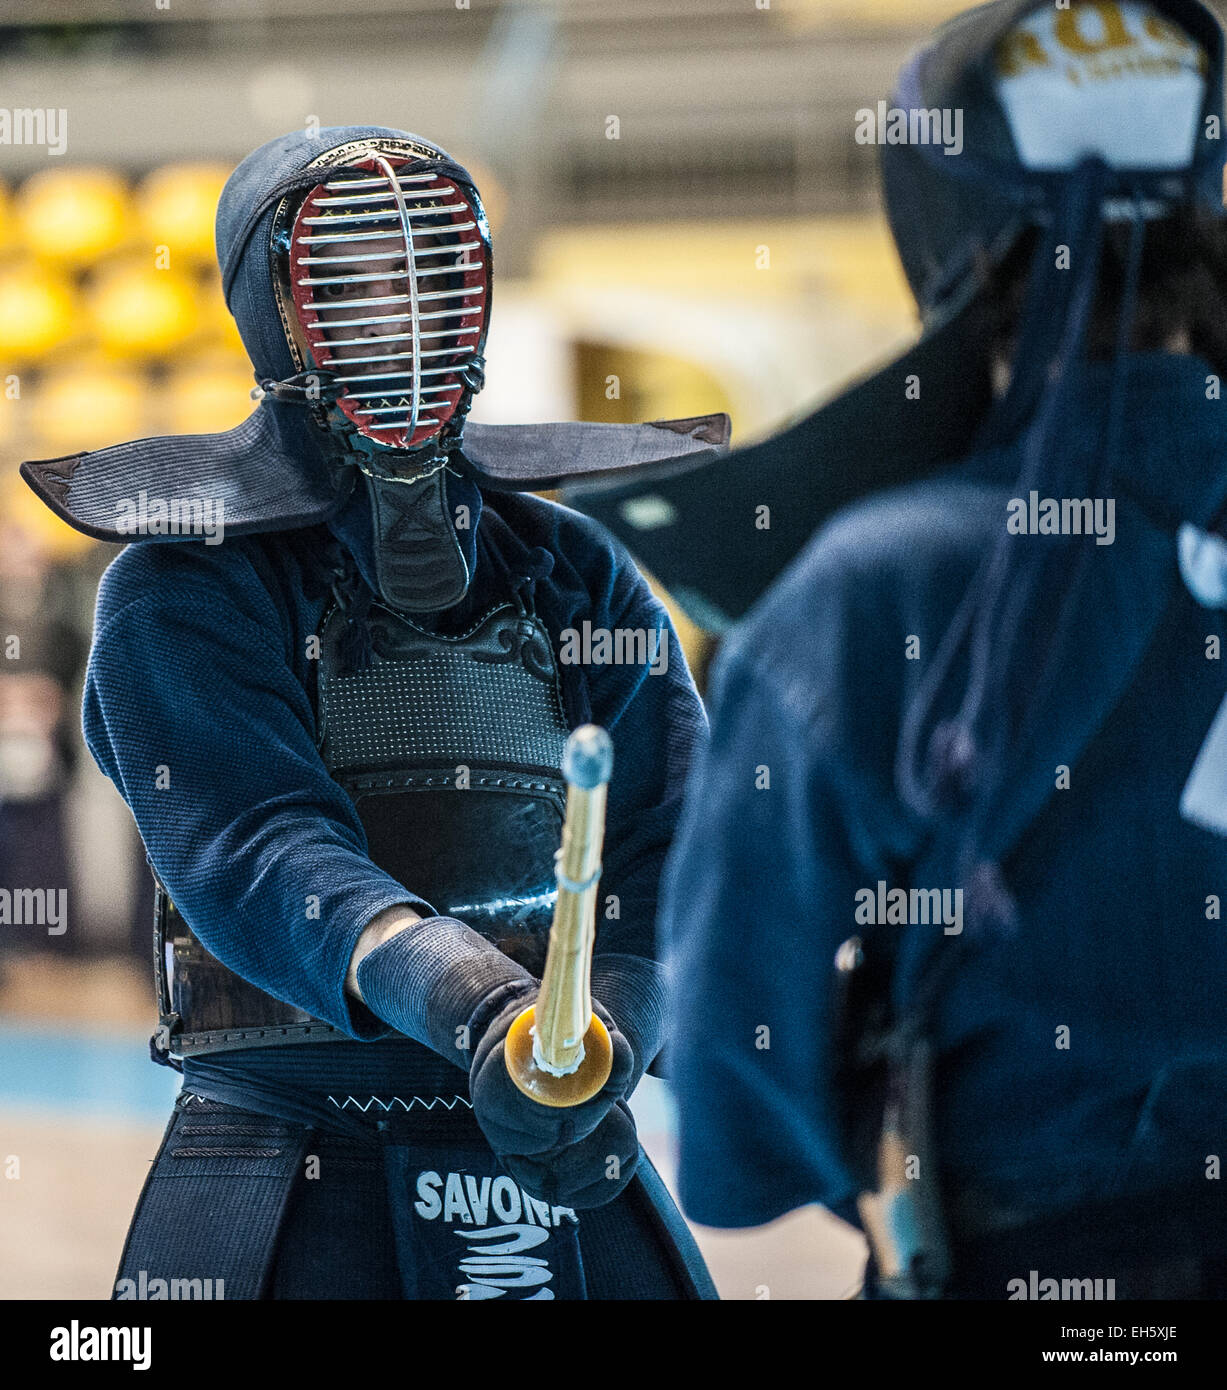 Piedmont, Turin, Italy. 7th March, 2015.   Italian Cik Kendo Championships individual - start competitions Credit:  Realy Easy Star/Alamy Live News Stock Photo